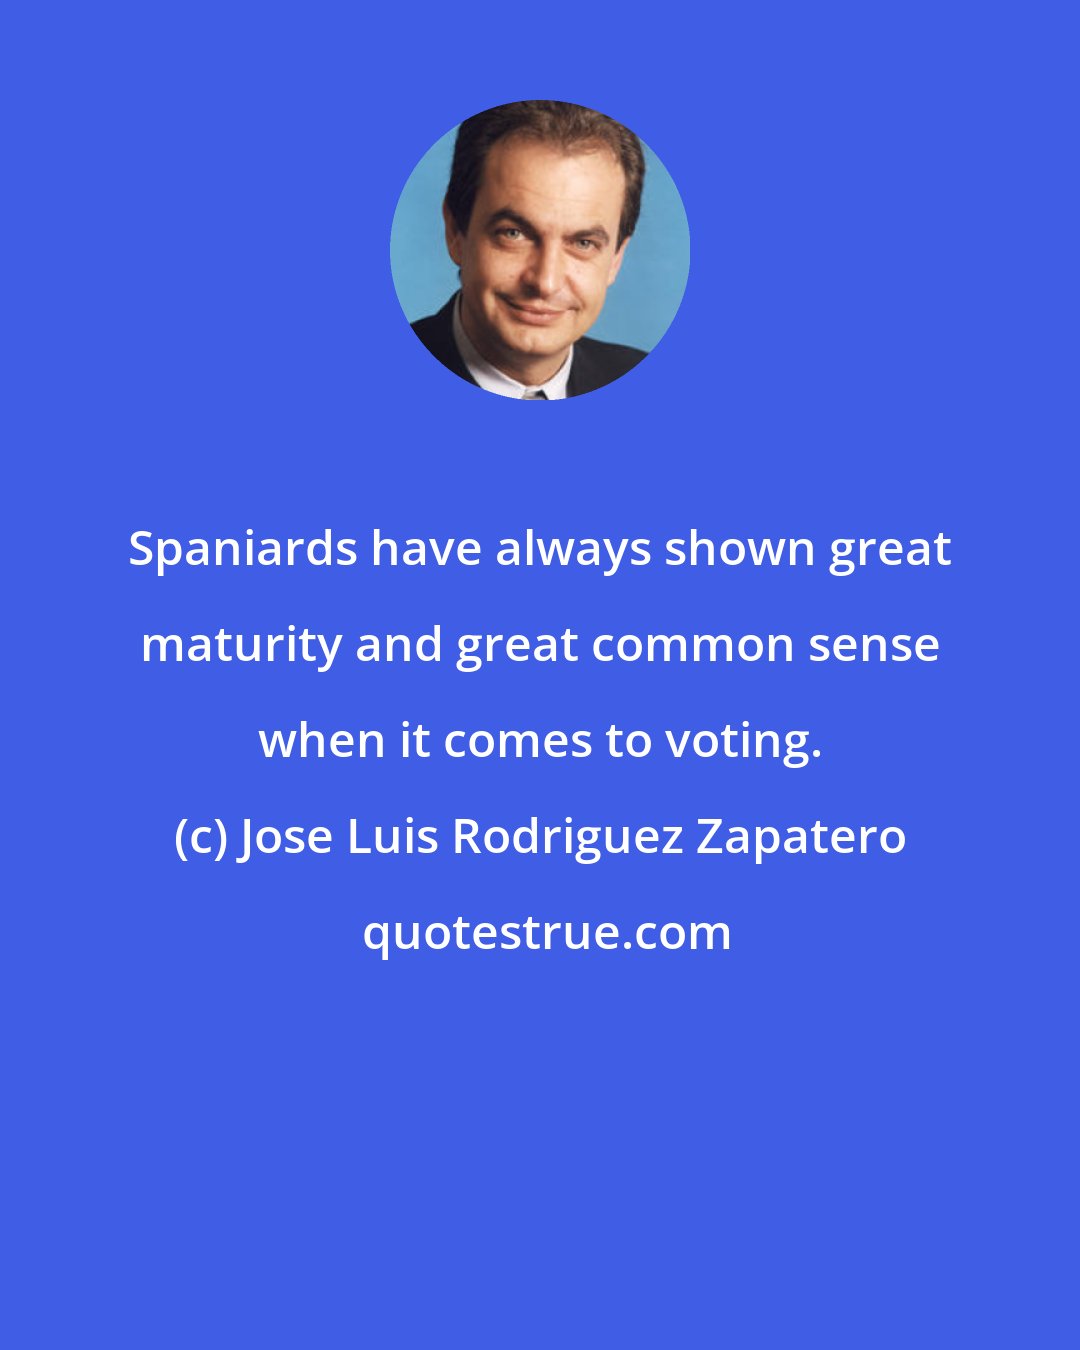 Jose Luis Rodriguez Zapatero: Spaniards have always shown great maturity and great common sense when it comes to voting.